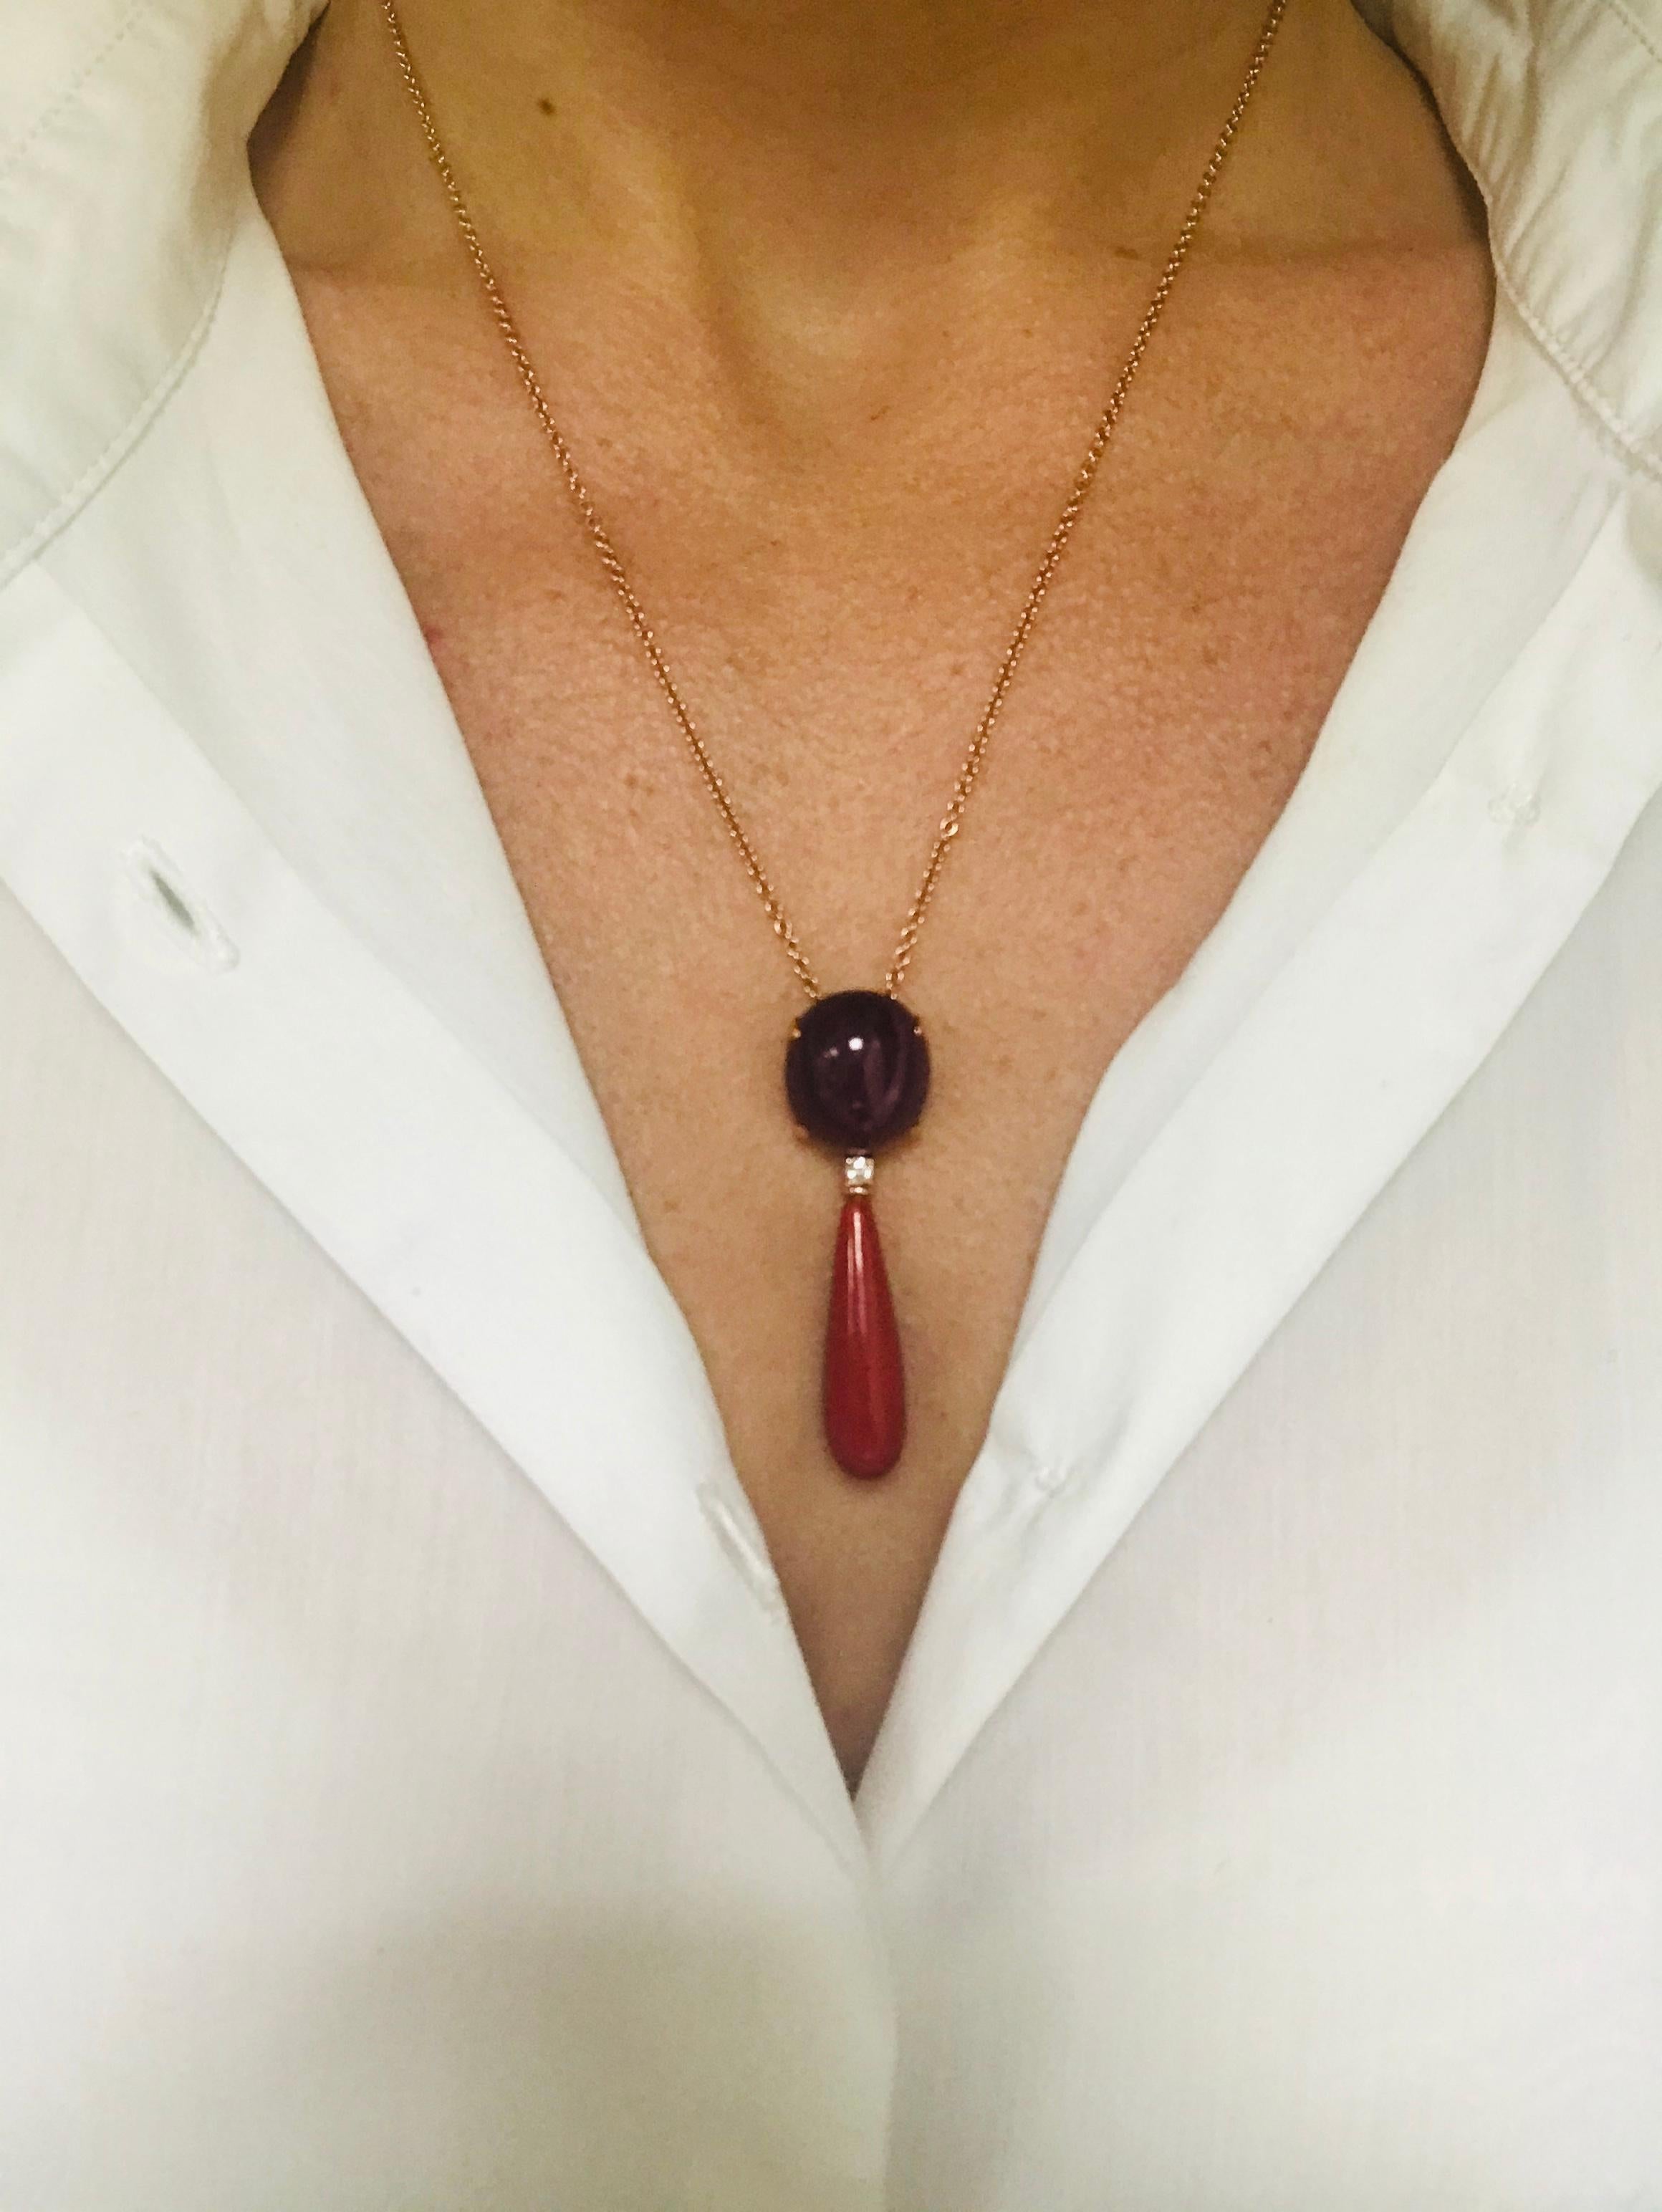 Pendant Neacklace Ruby Glass filed Diamond Coral Rose Gold 18 Karat In New Condition For Sale In Vannes, FR